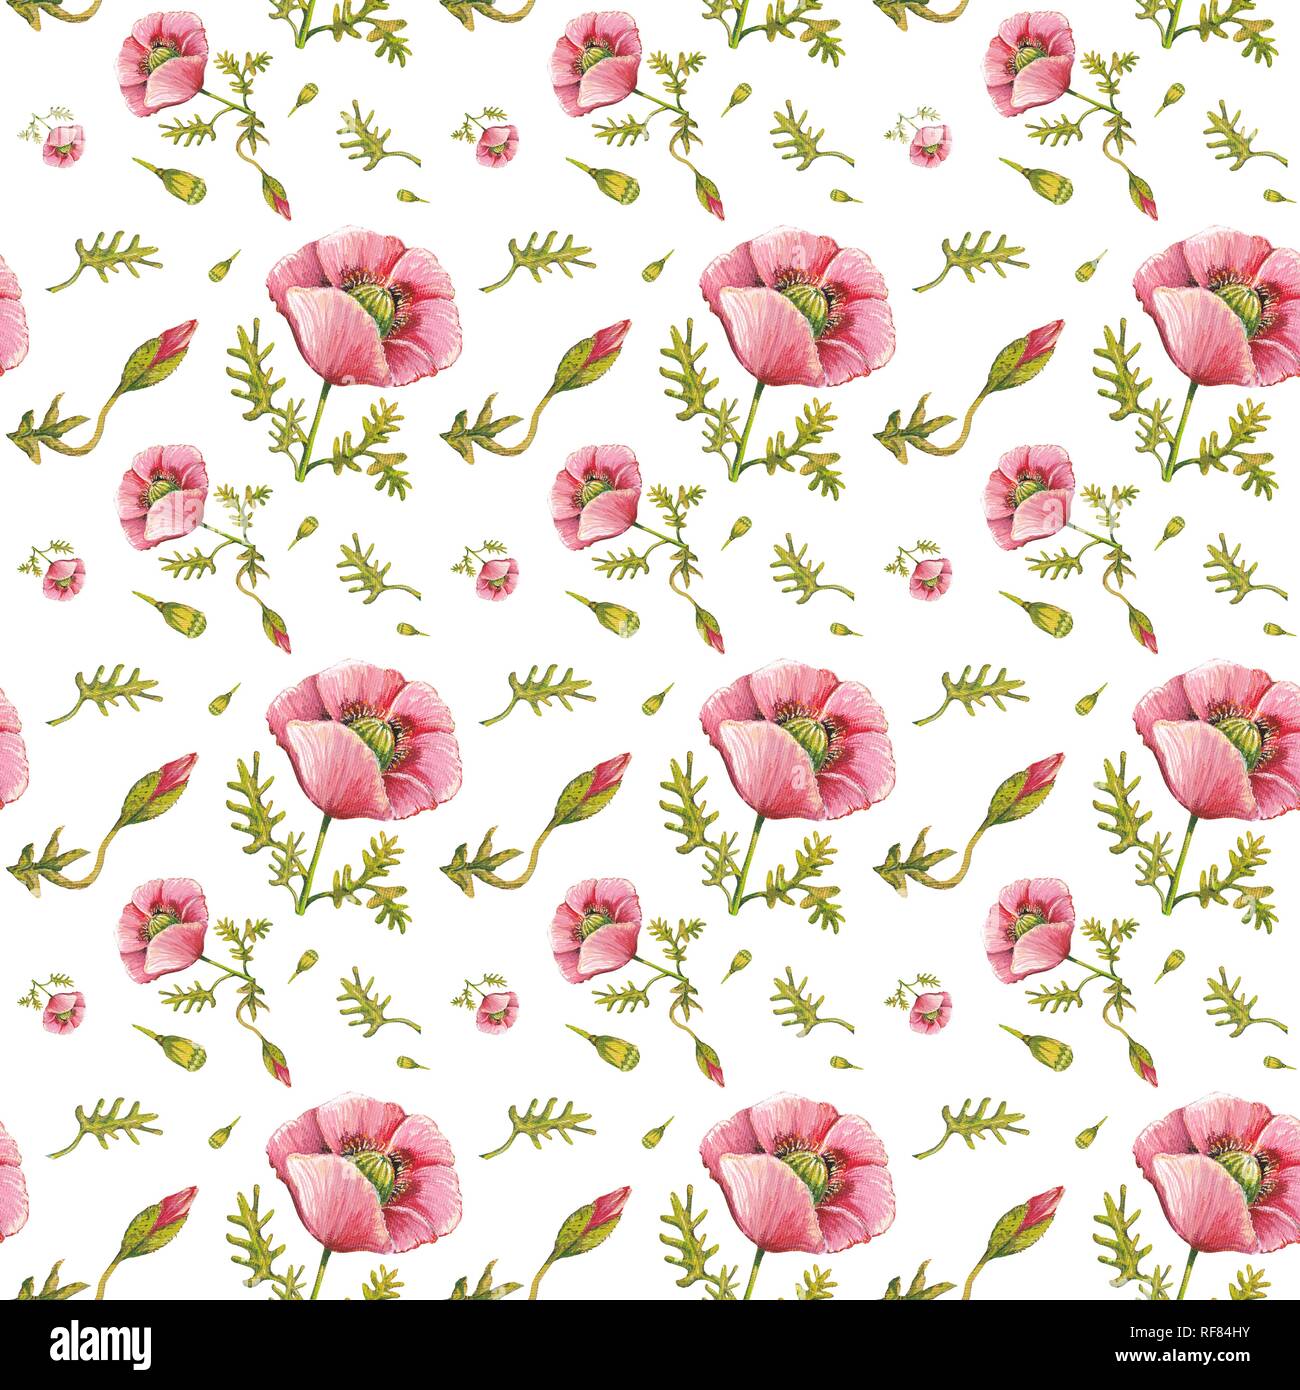 Wallpaper, wrapping paper, seamless pattern, poppies in pink, background  white, Germany Stock Photo - Alamy